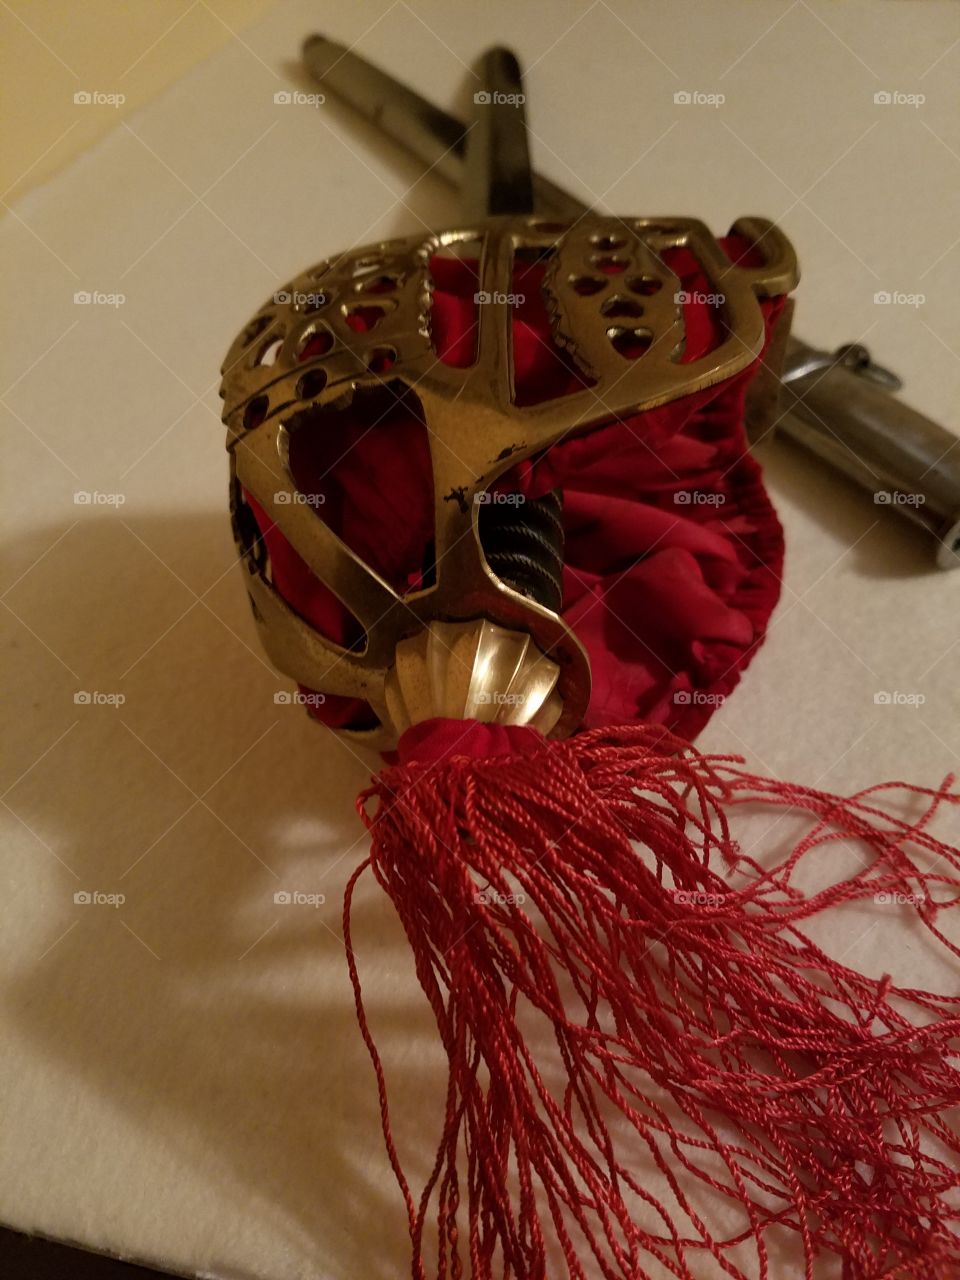 antique sword red velvet lining covering the inside of the hand guard with red tassel